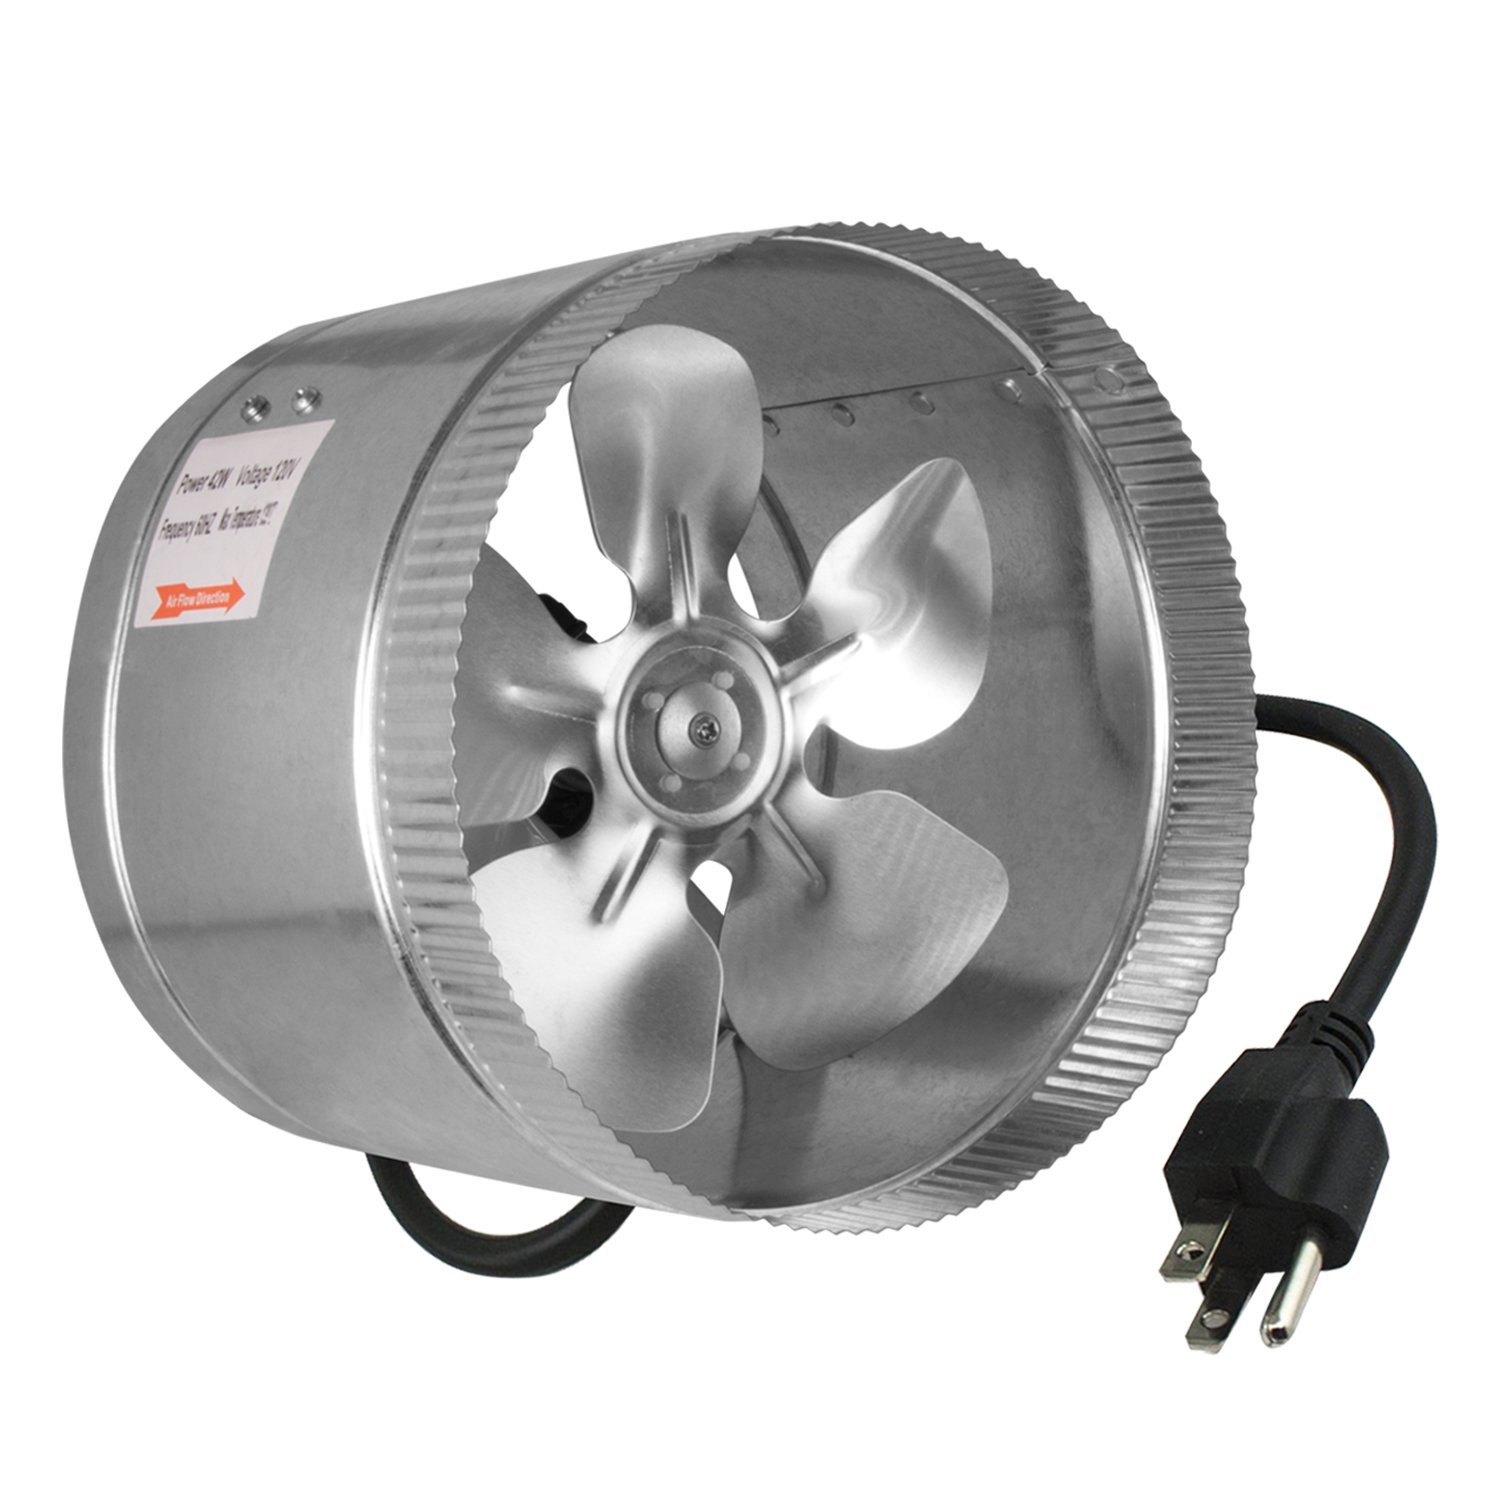 iPower 8 Inch 420 CFM Inline Duct Booster Fan Extractor Fan Dryer Vent, 5.5' Grounded Power Cord